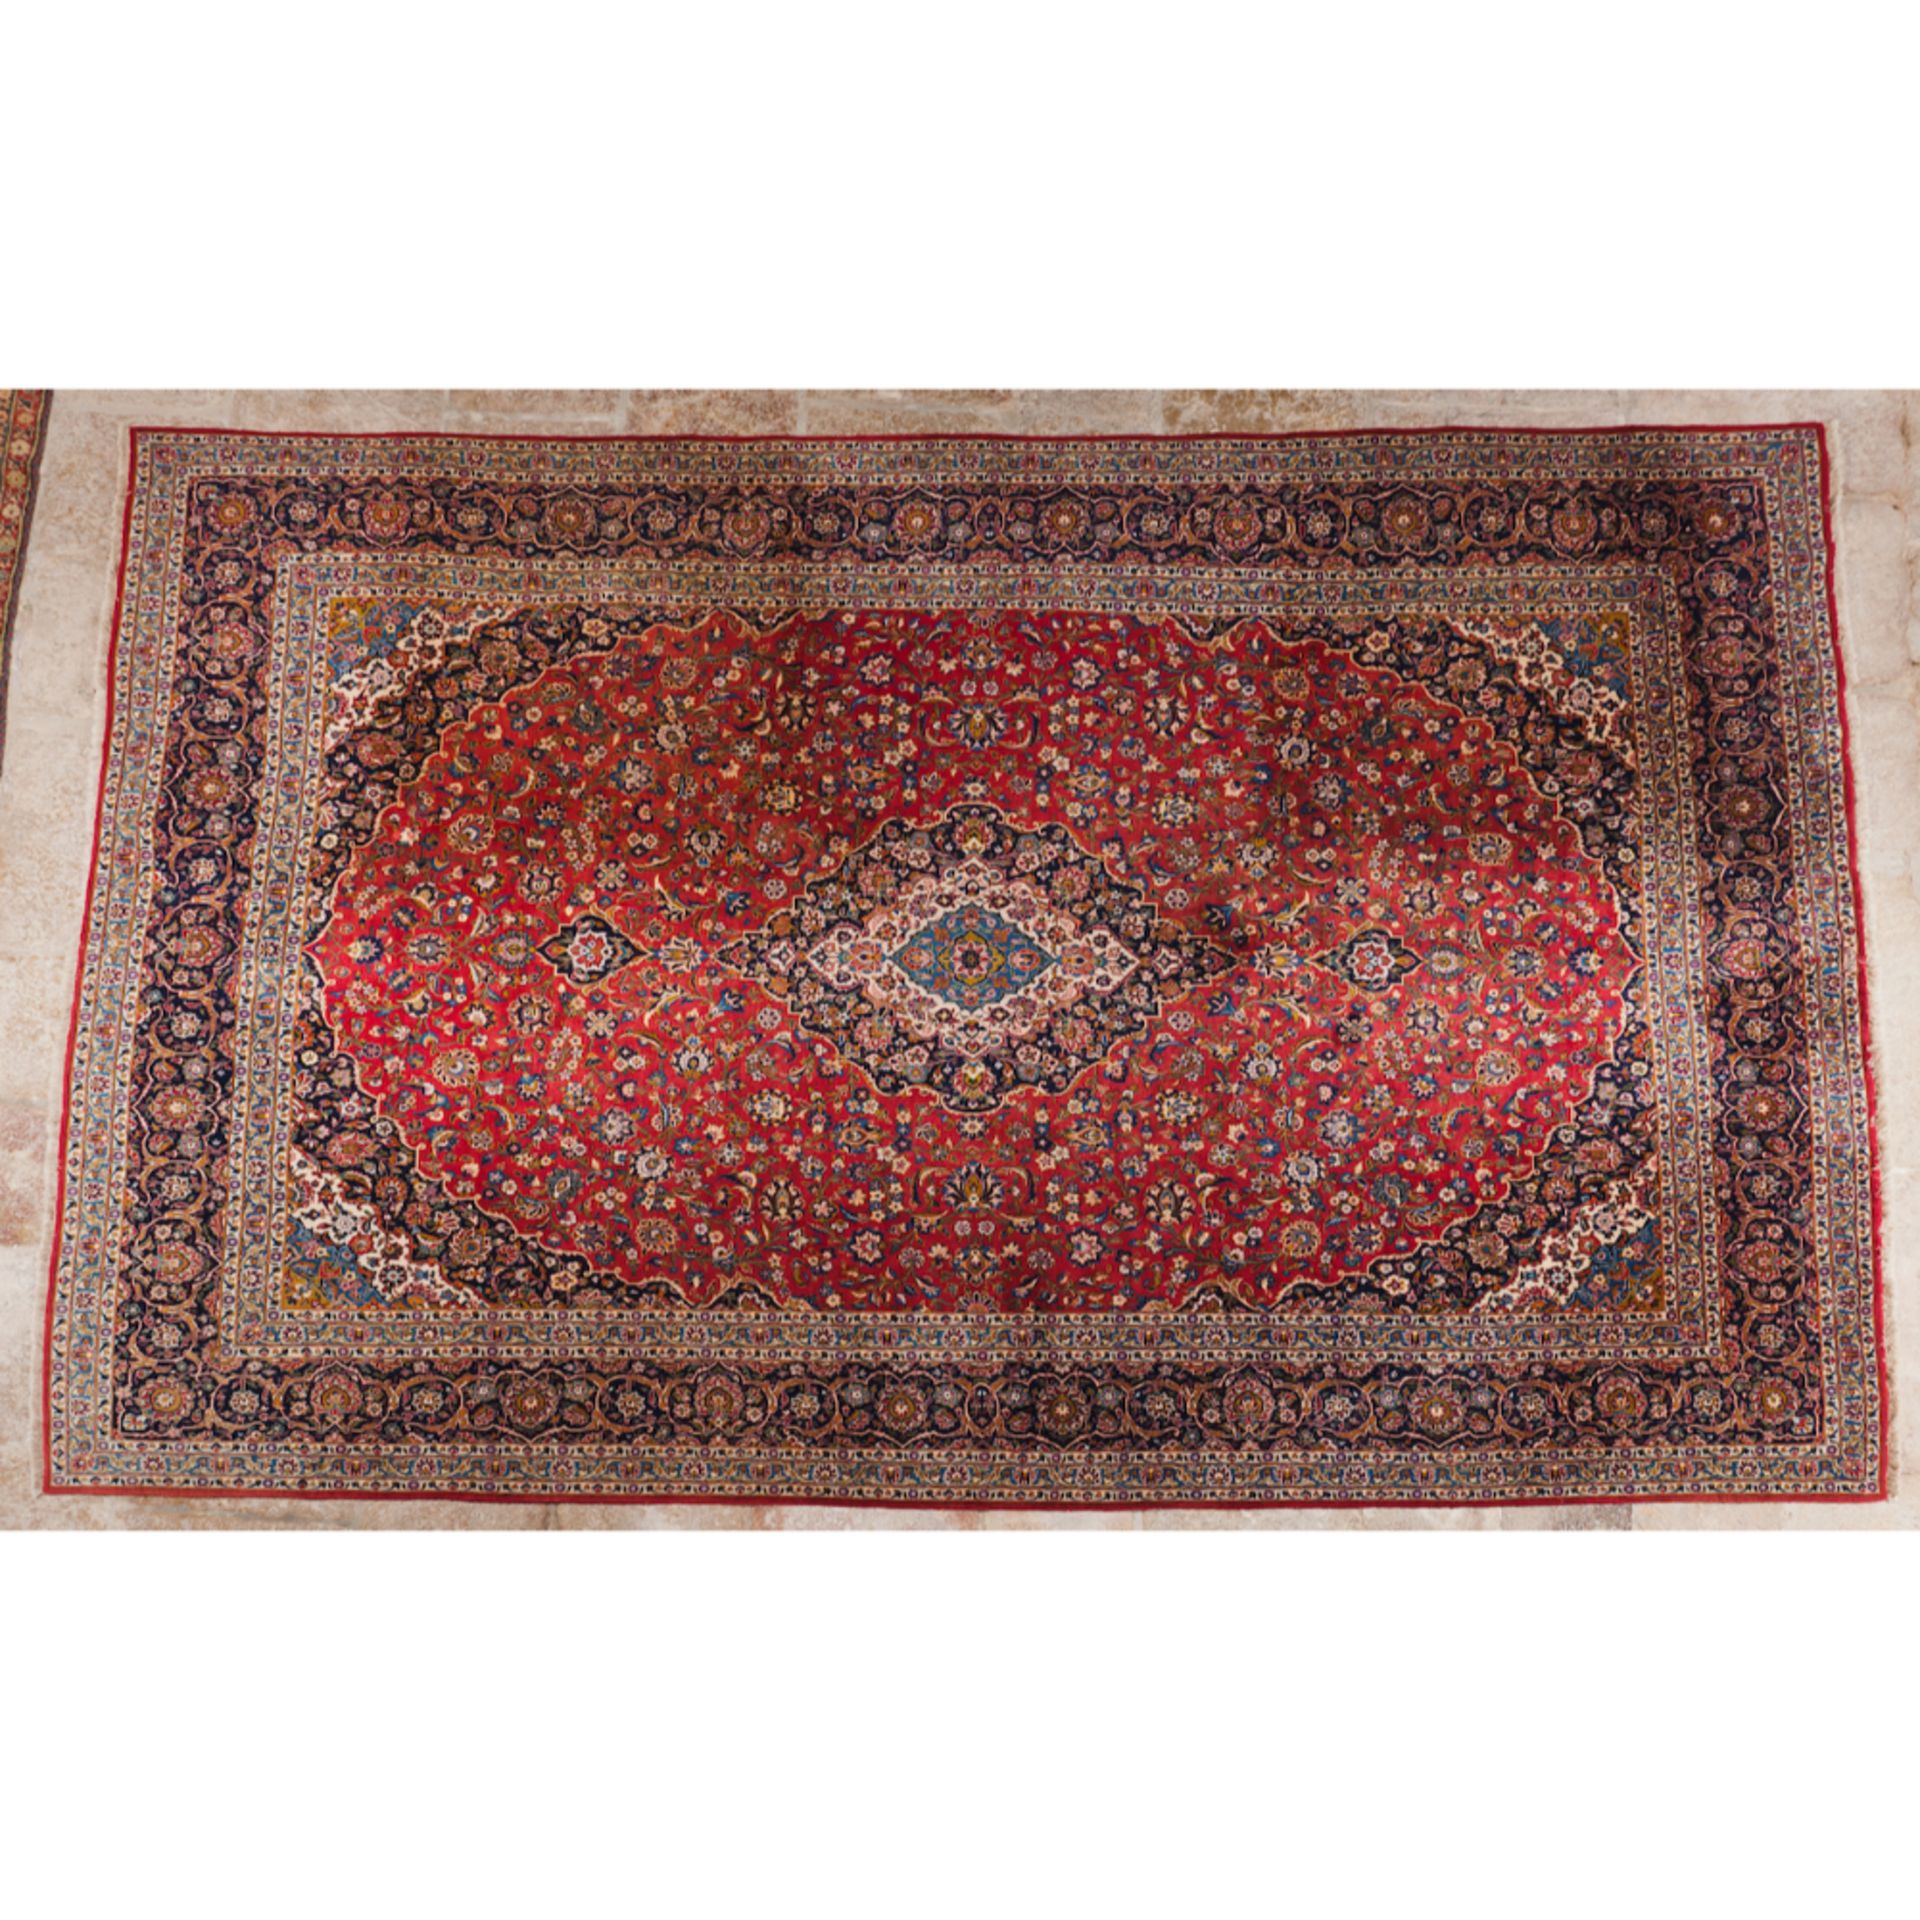 A Kashan rug, IrãoIn wool and cotton Floral design in shades of bordeaux, blue, green and beige